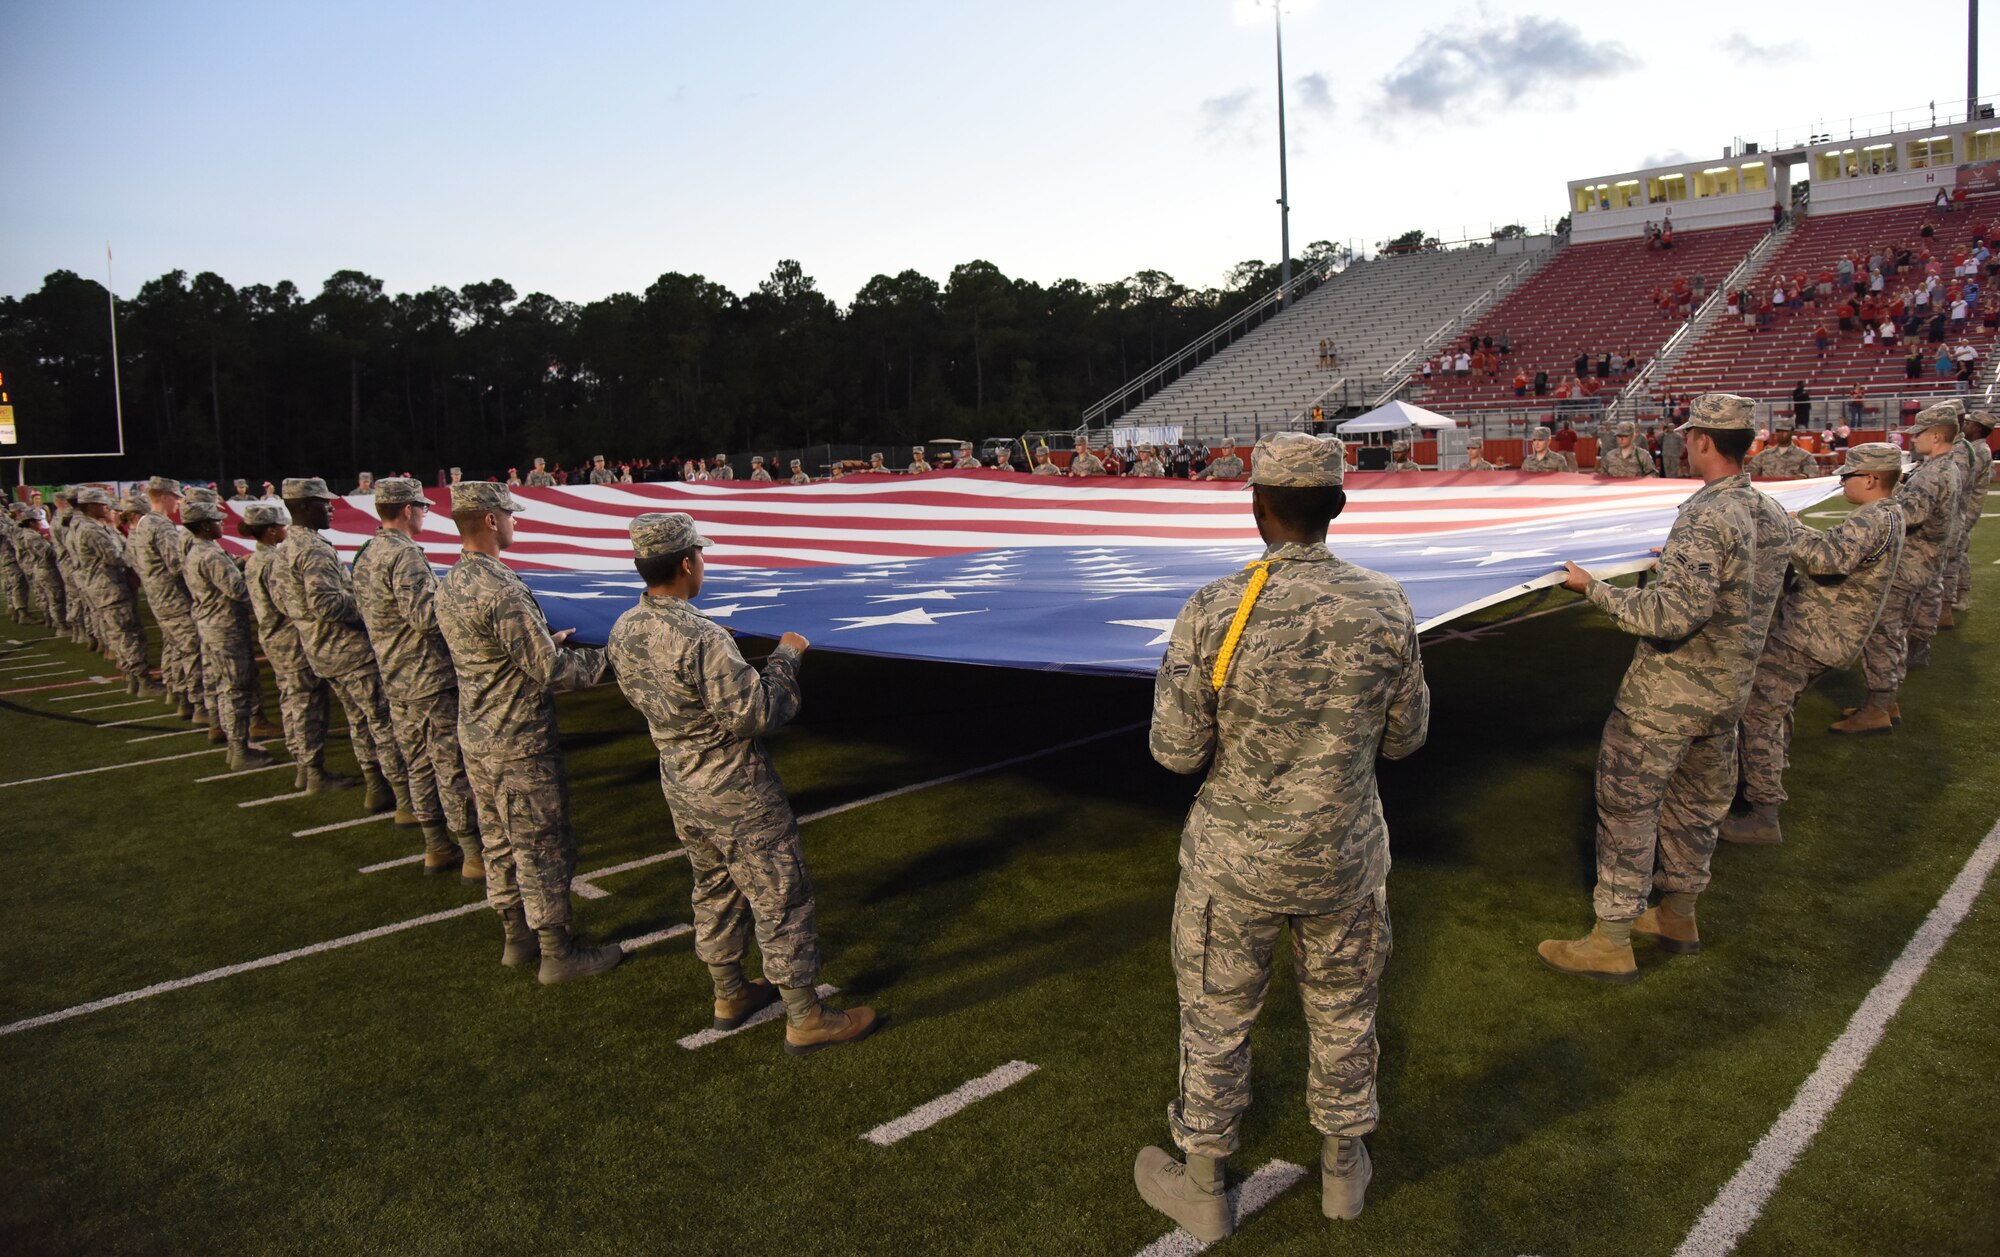 Keesler Airmen hold the U.S. Flag during the playing of the national anthem at the Biloxi High School military appreciation night football game in Biloxi, Mississippi, Oct. 5, 2018. Keesler personnel also participated in the coin toss to determine which team would receive the ball first. (U.S. Air Force photo by Kemberly Groue)